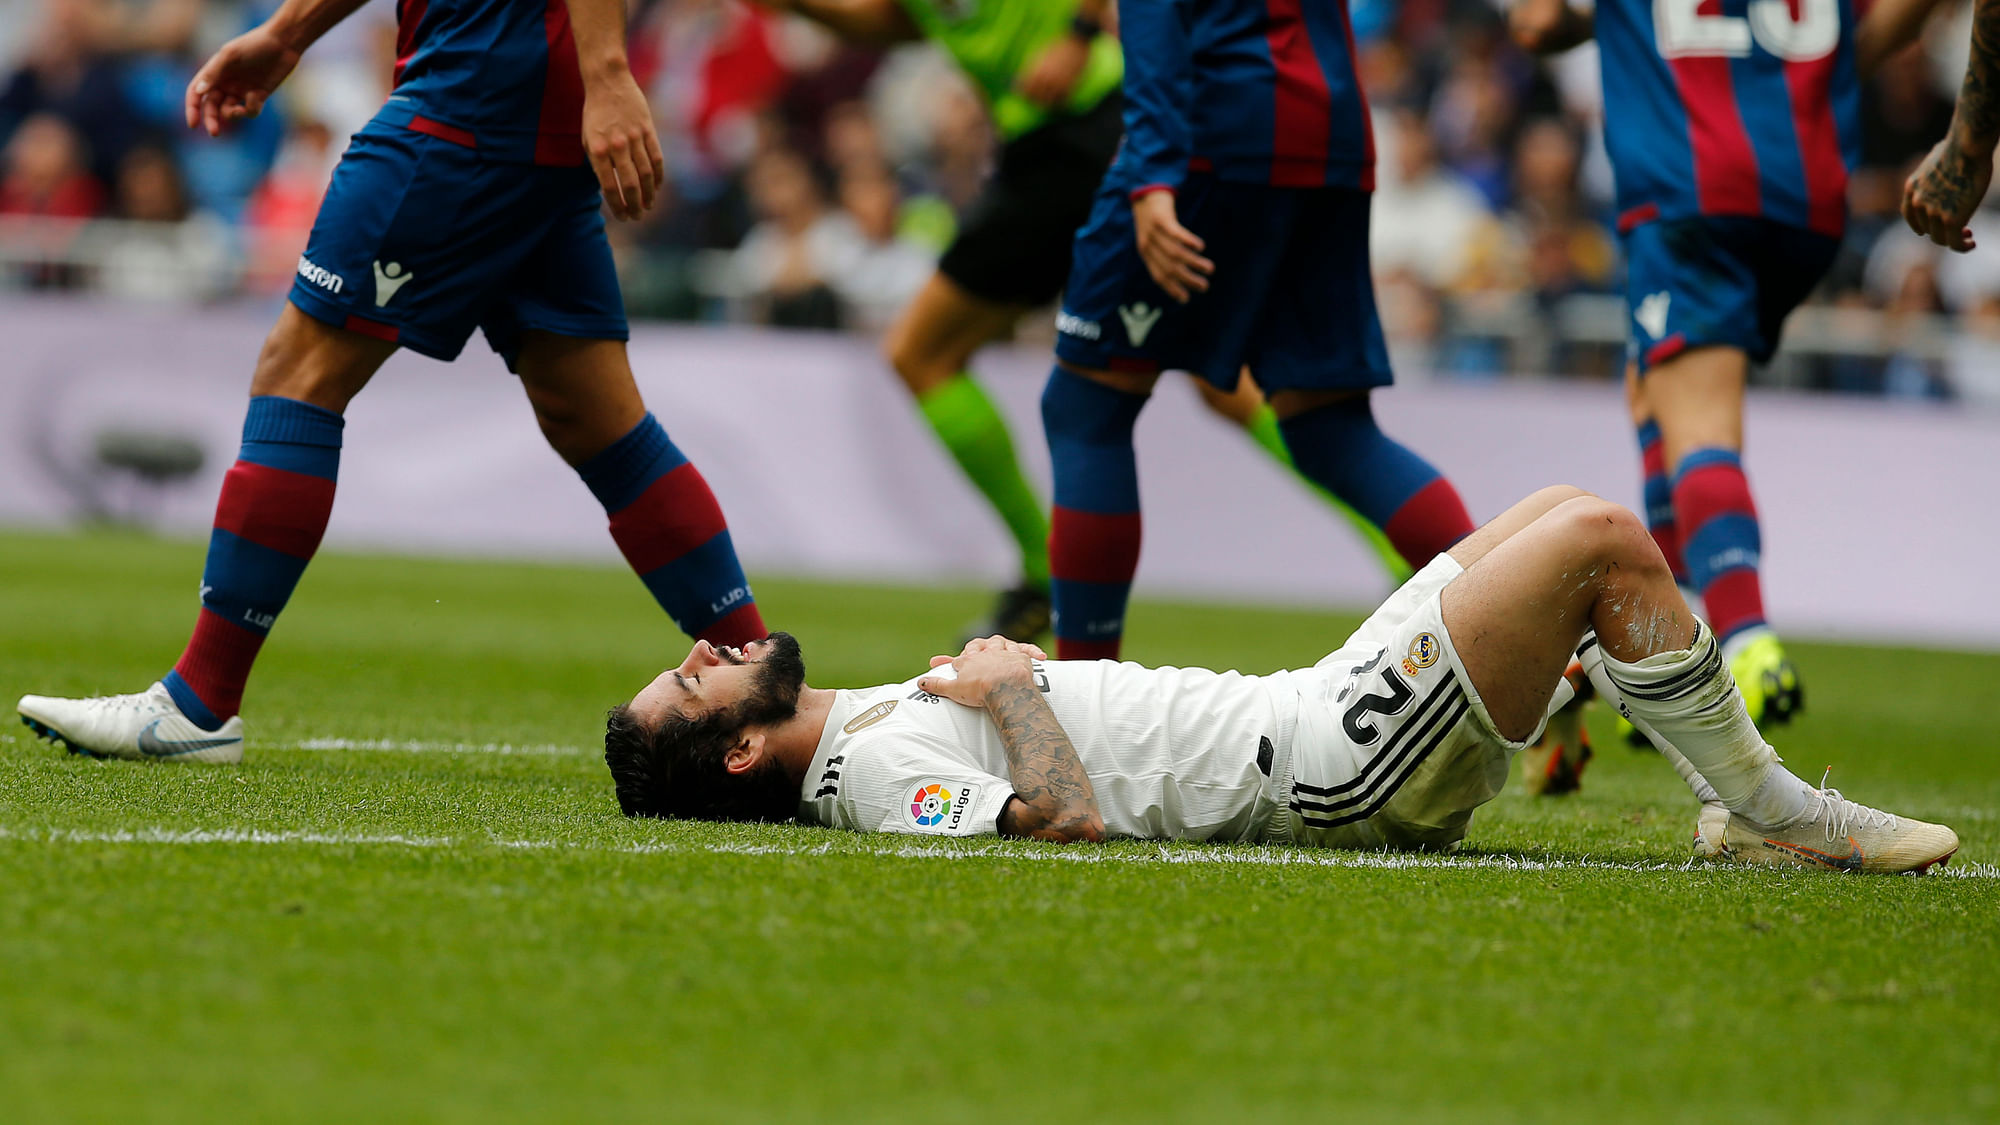 Real Madrid’s Isco lies on the ground during a Spanish La Liga soccer match between Real Madrid and Levante at the Santiago Bernabeu stadium in Madrid, Spain.